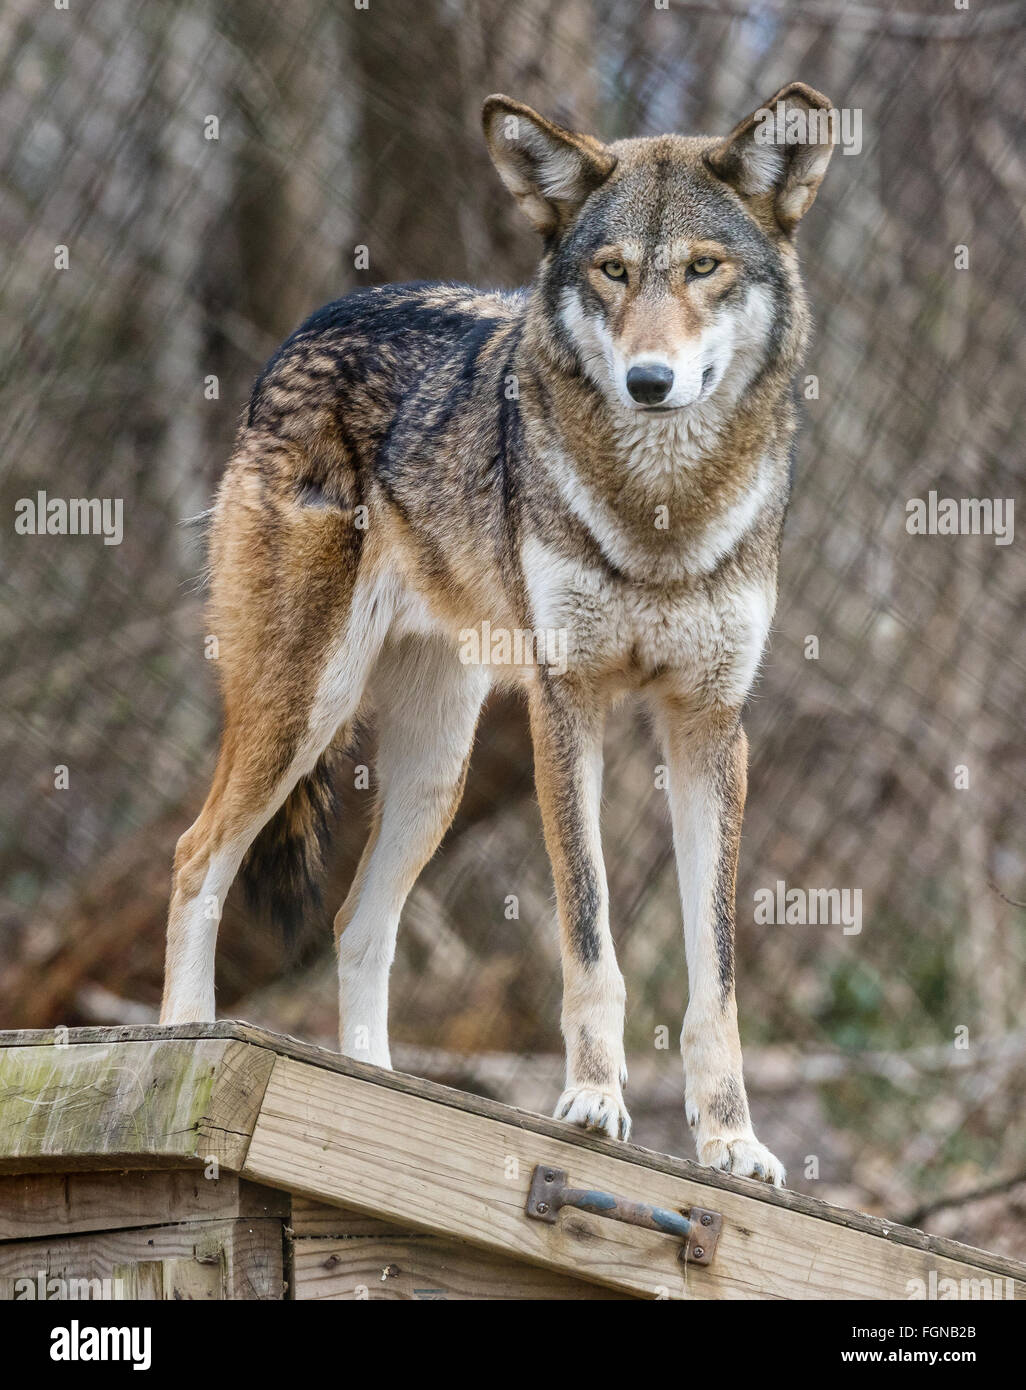 Endangered Red Wolf (Canis rufus) standing on a shed in a zoo Stock Photo